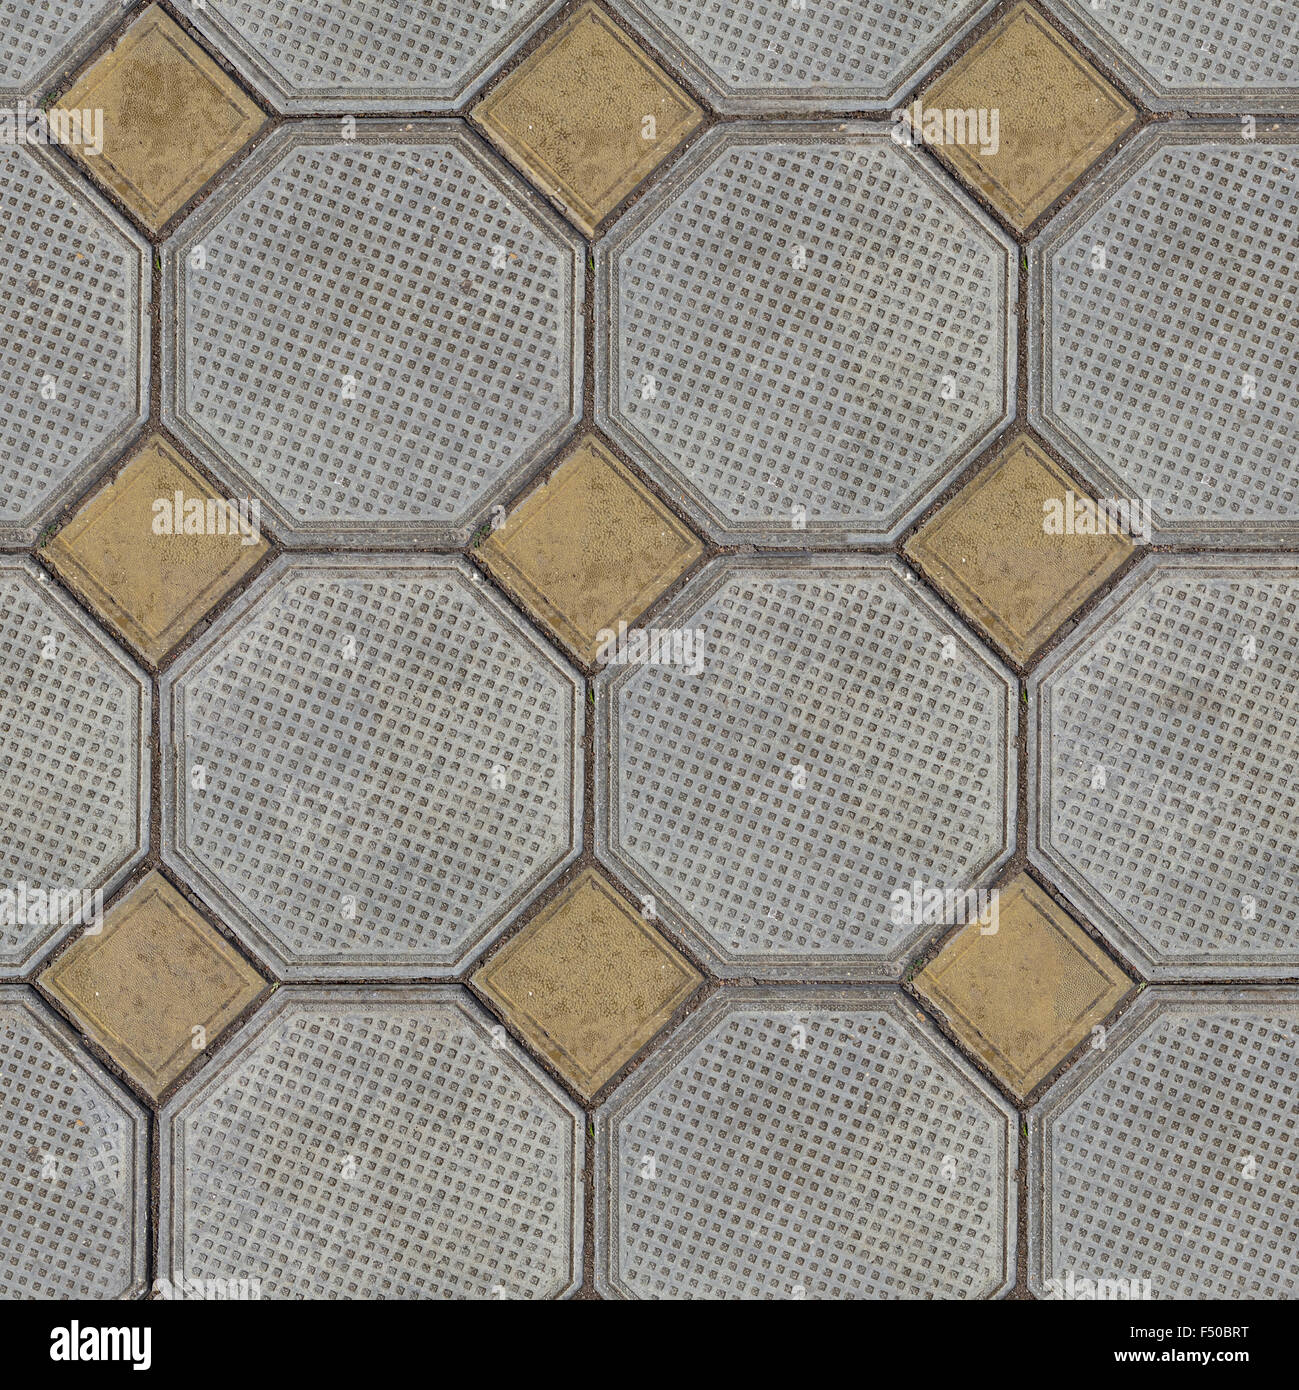 Tiles Laid out of Large Gray Polygons and Small Yellow Squares in the Corners. Stock Photo